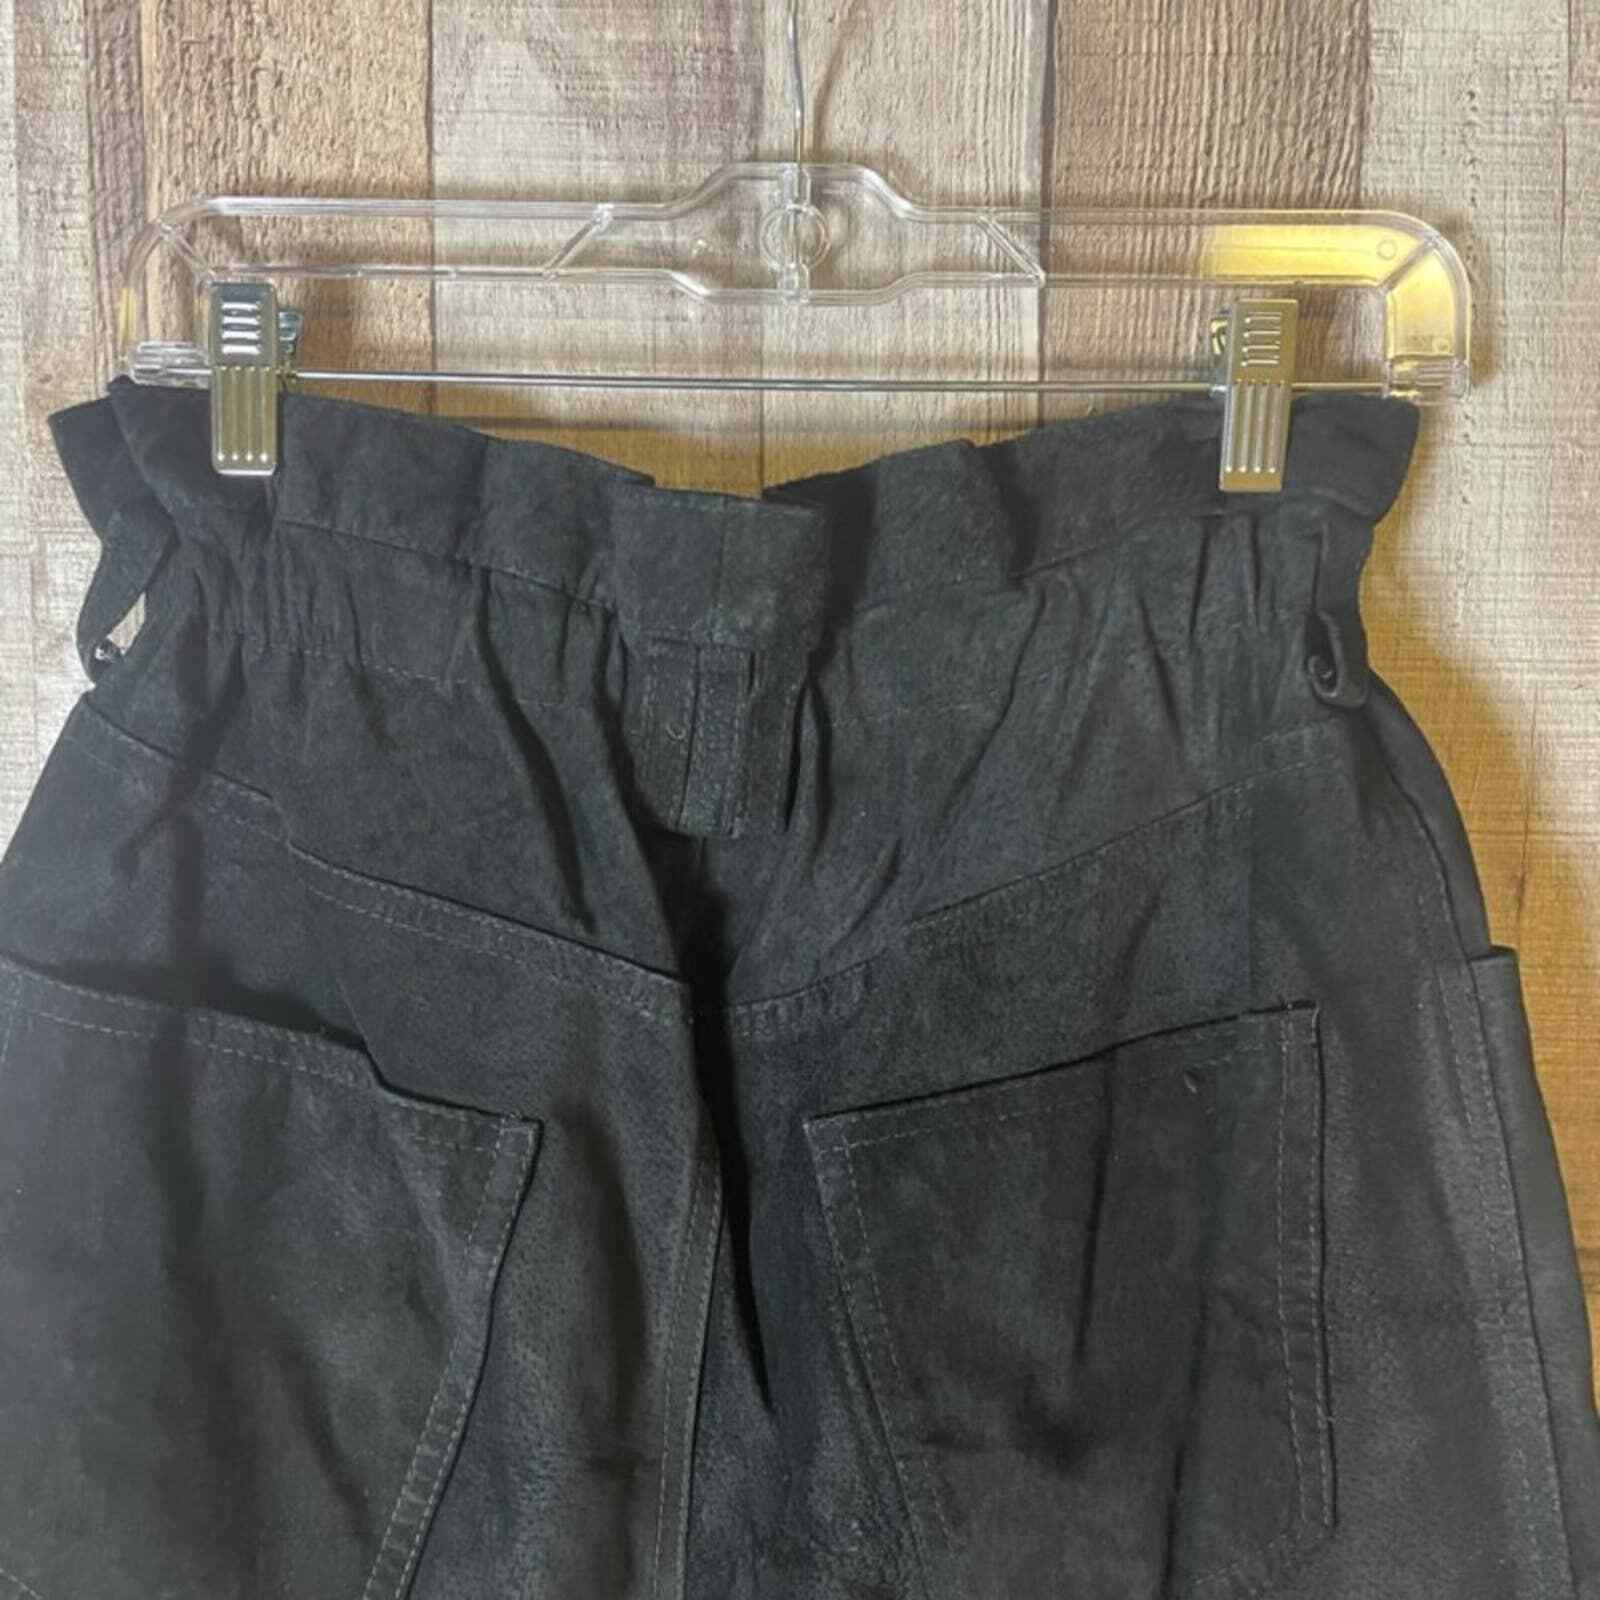 Vintage Leather Suede Culottes Shorts - image 4